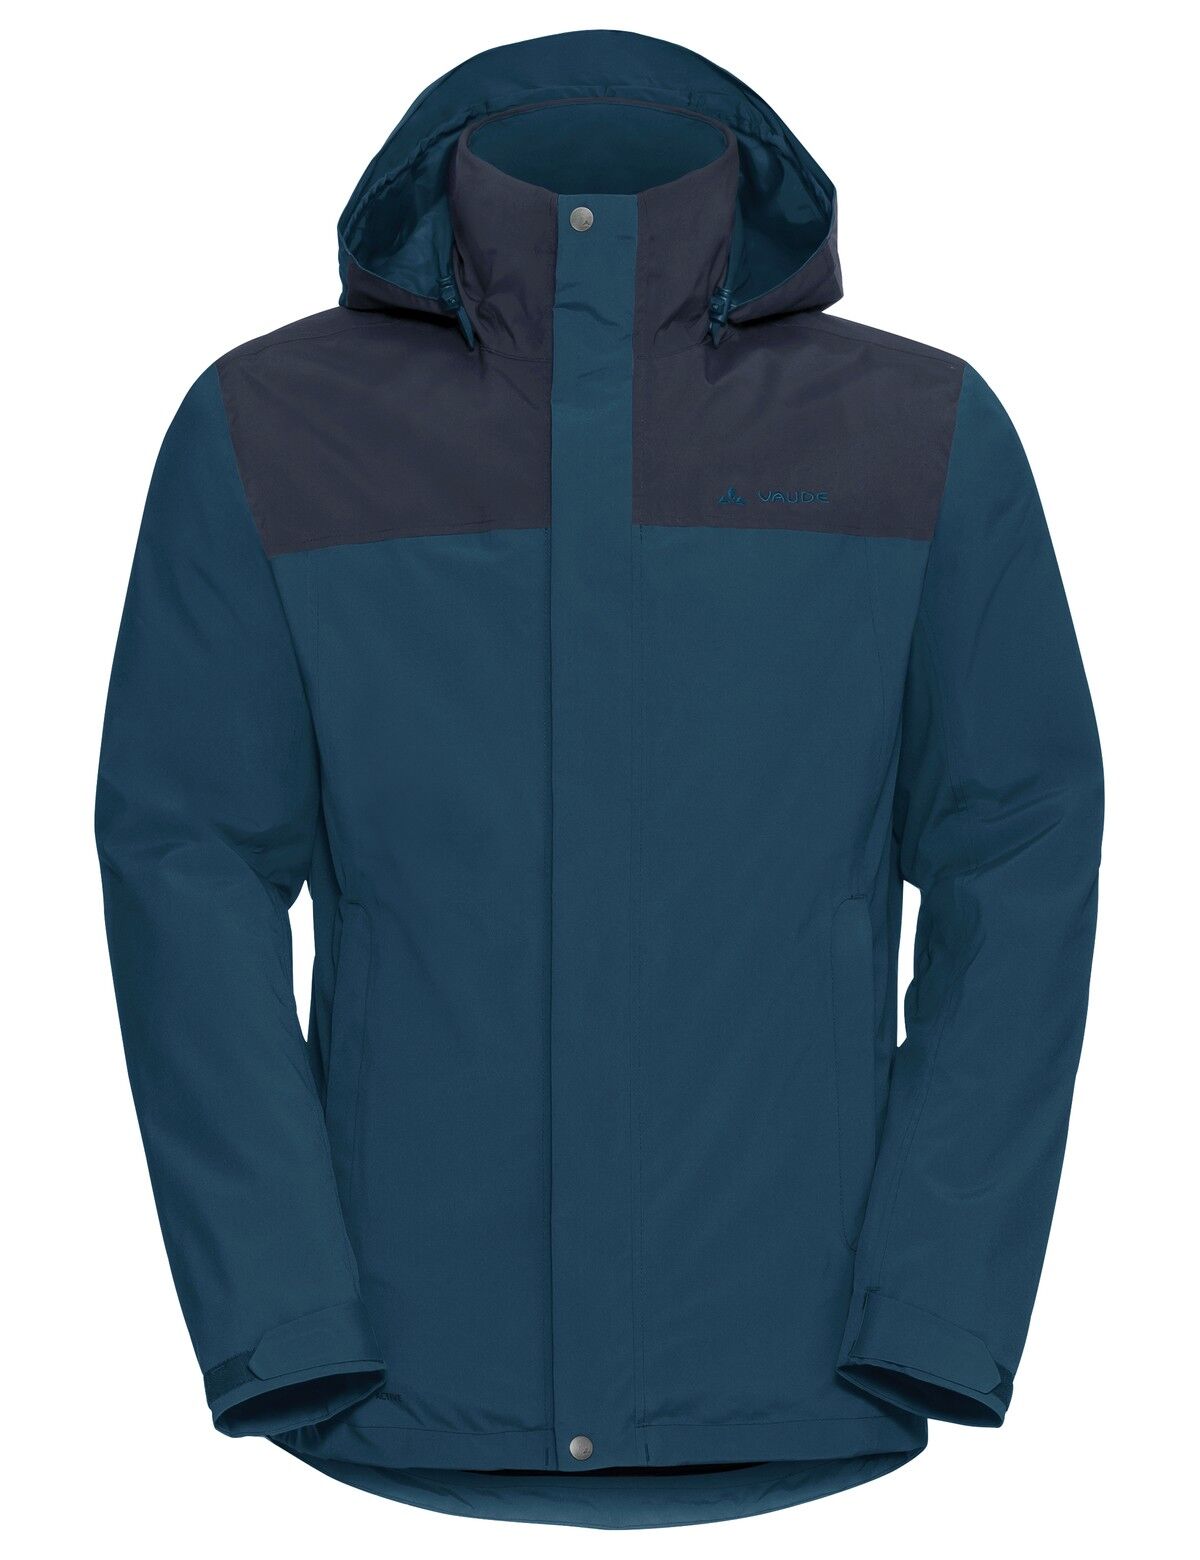 Vaude - Kintail 3in1 Jacket III - Chaqueta impermeable - Hombre